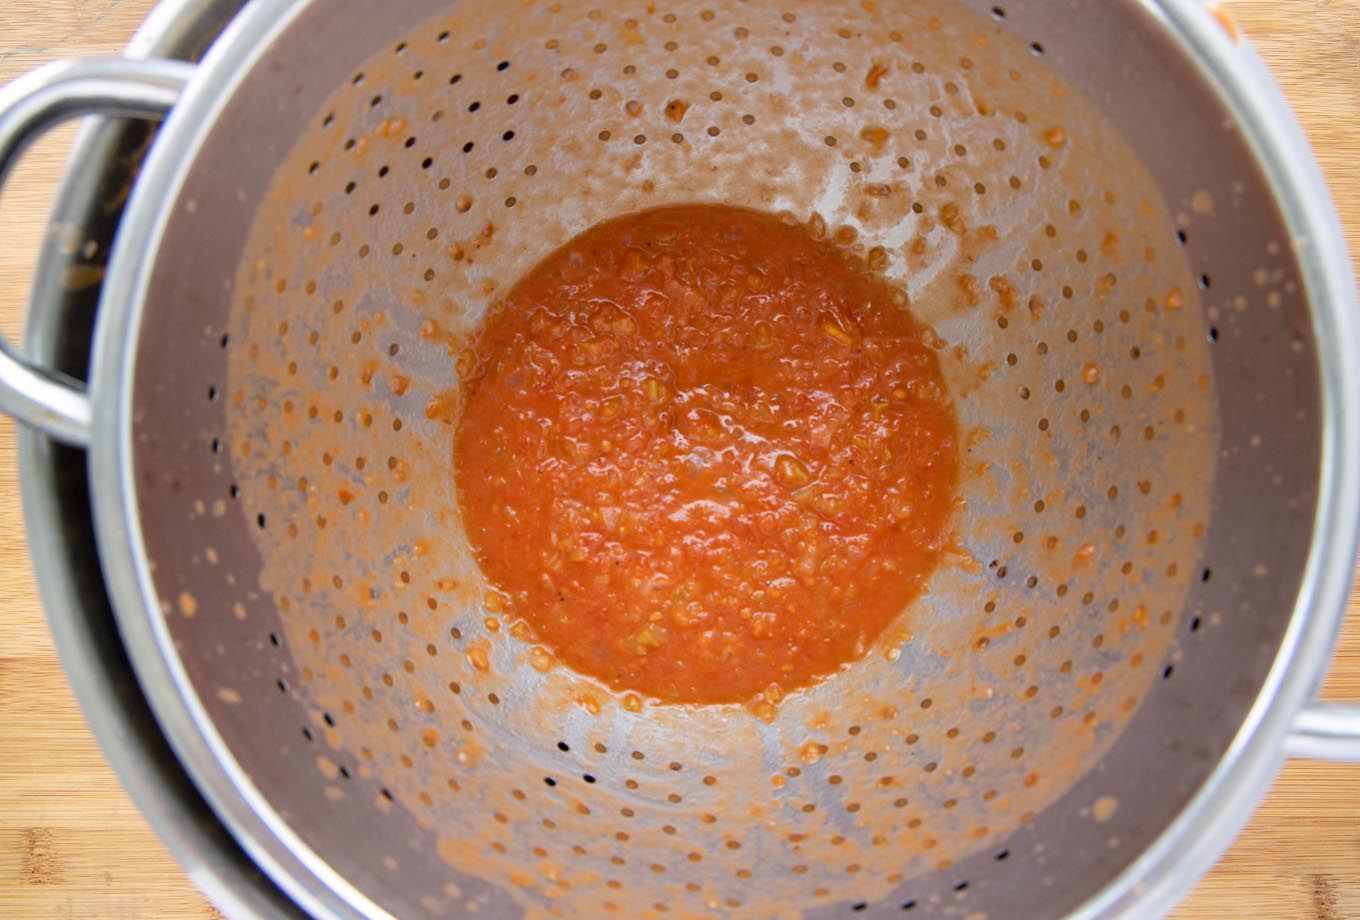 strainer holding bits of celery, onion and tomato that weren't pureed